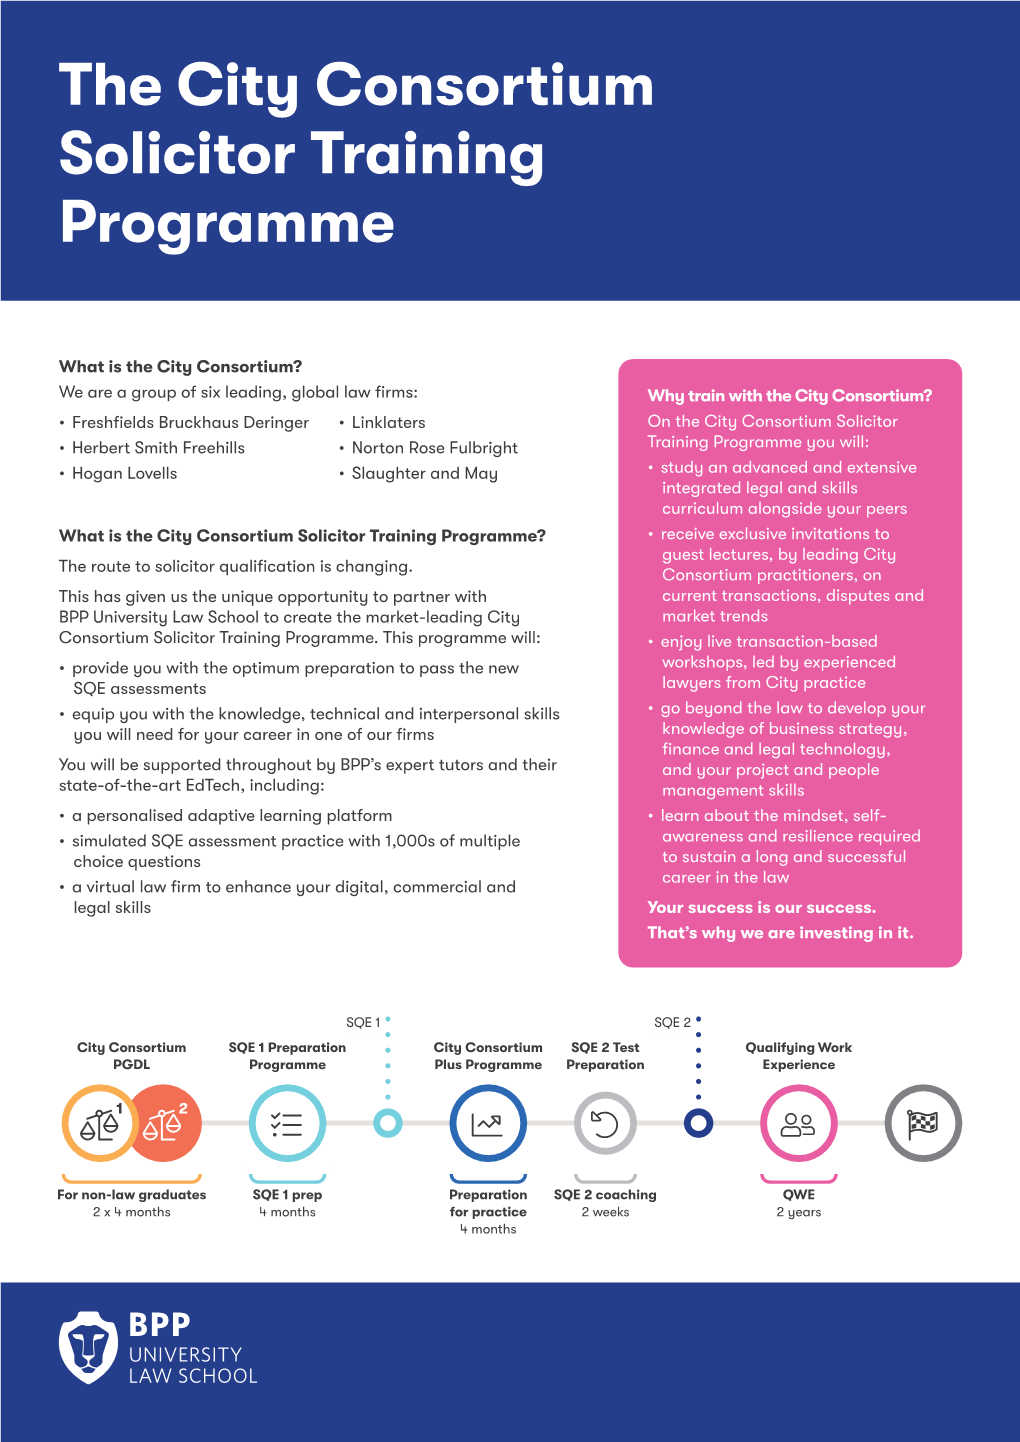 The City Consortium Solicitor Training Programme